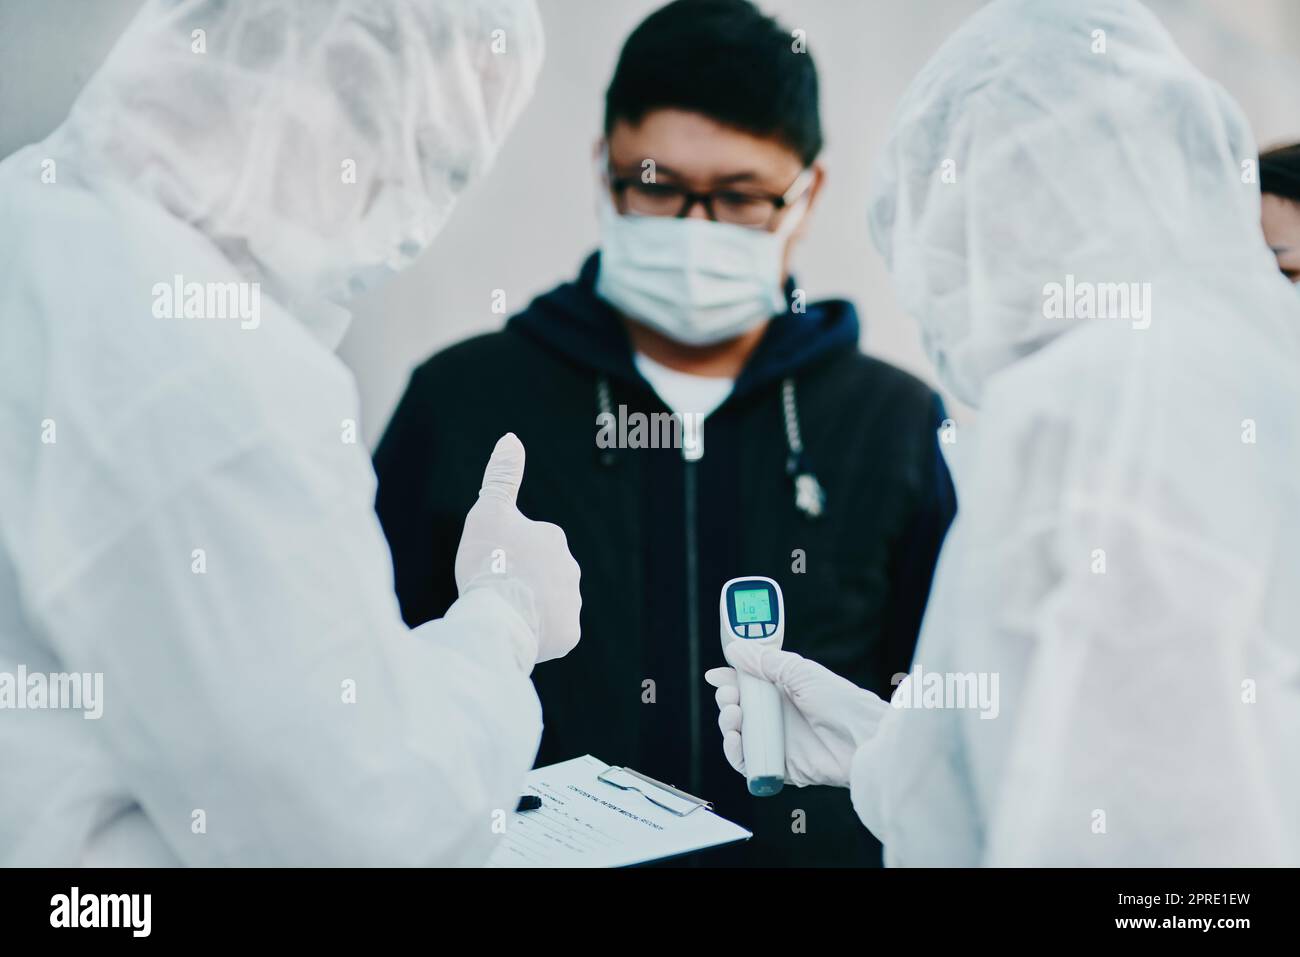 Negative covid test and thumbs up for young man from healthcare worker after testing for virus. Medical professionals in hazmat suits taking temperature tests during disease outbreak or pandemic Stock Photo